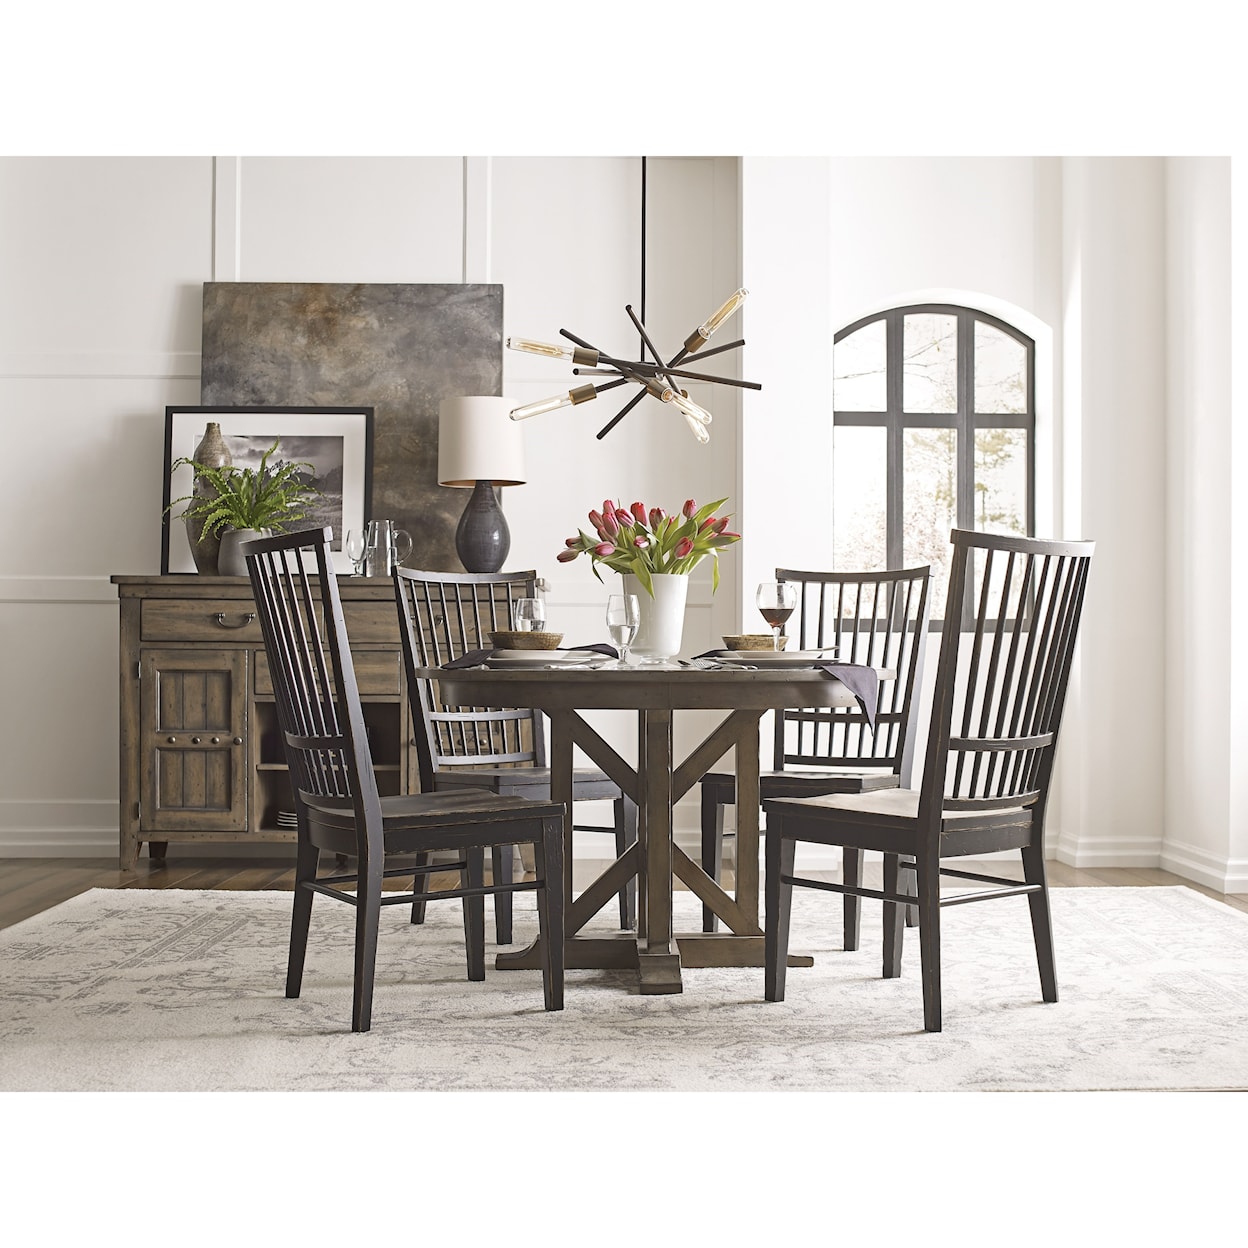 Kincaid Furniture Mill House Casual Dining Room Group